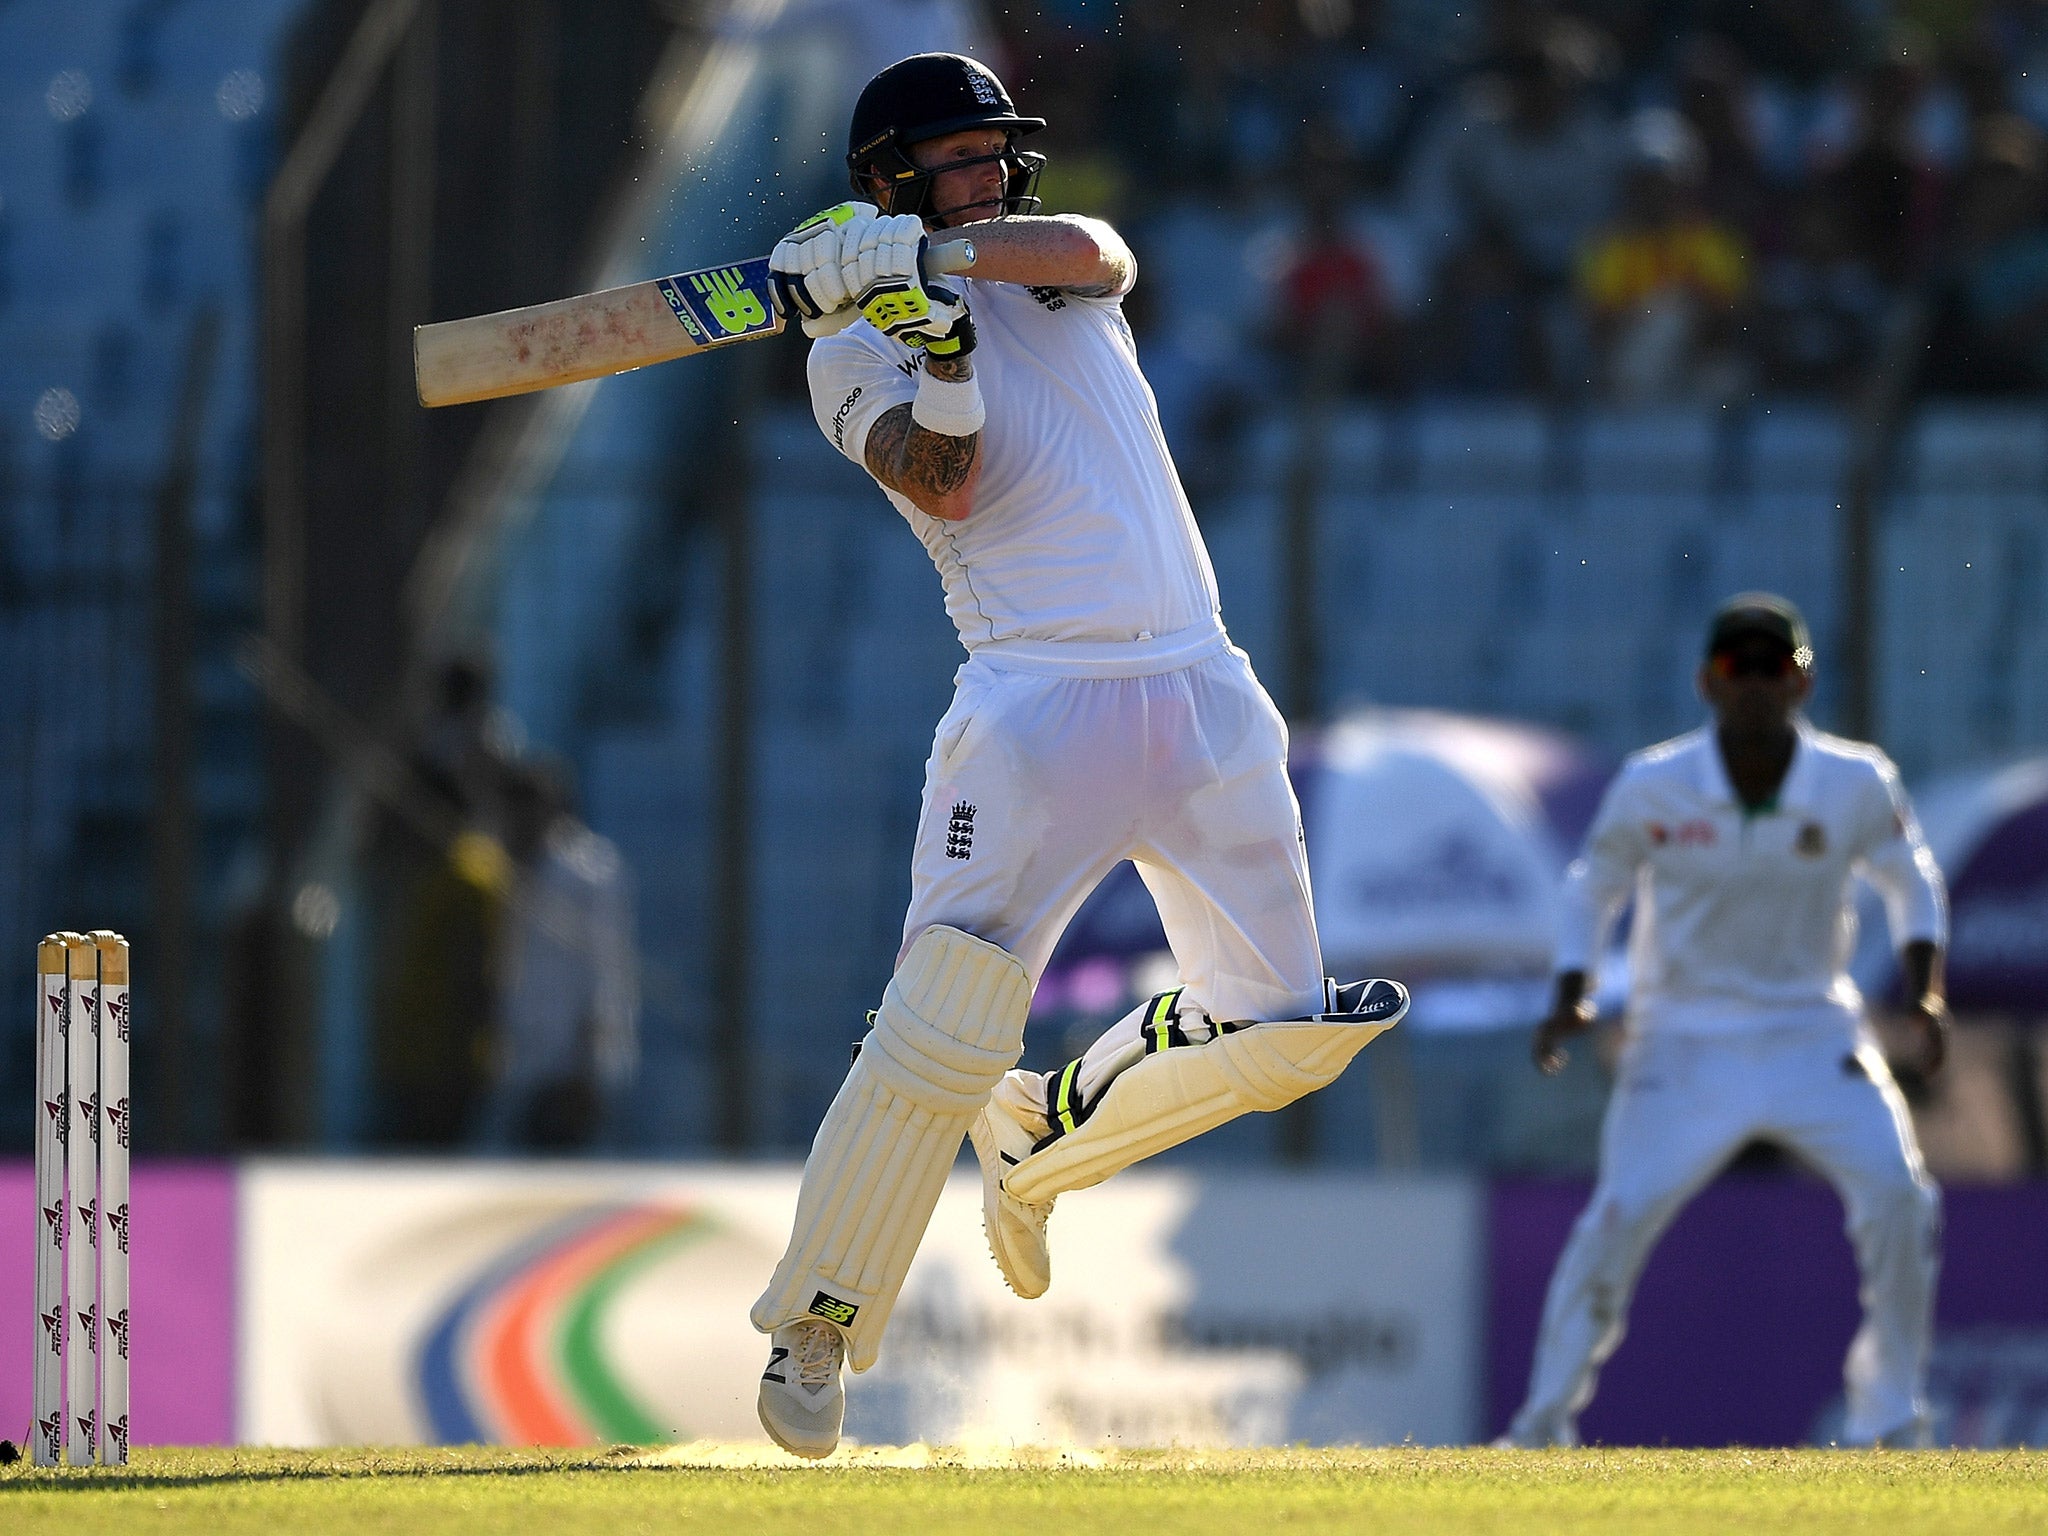 Stokes hit 85 with the bat to put England in a commanding position at the end of day three